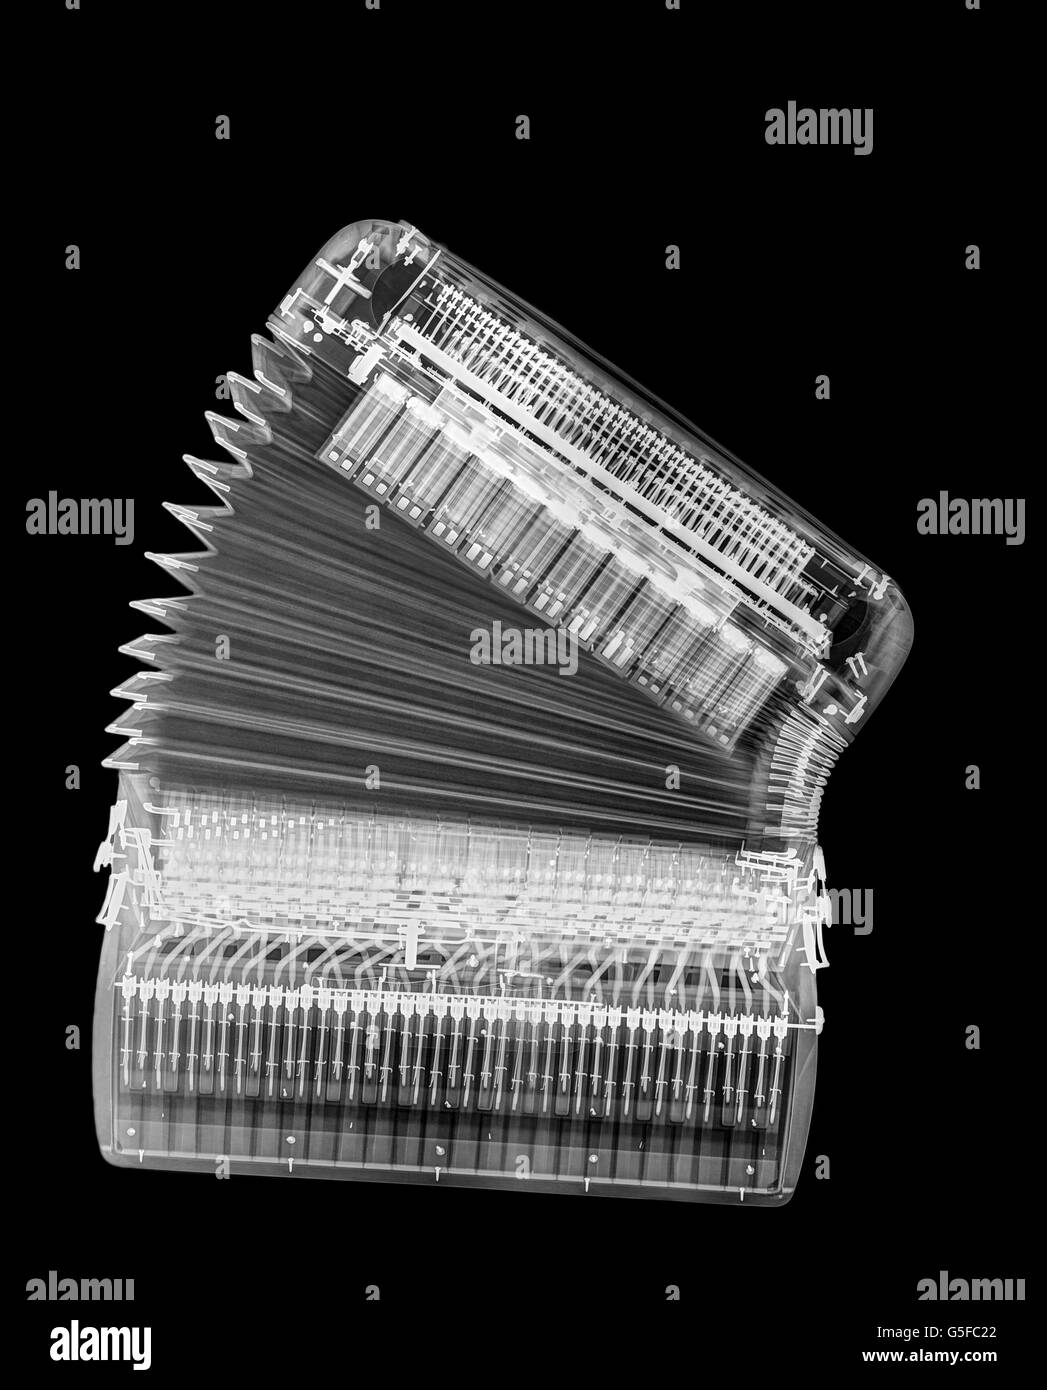 X-ray of an Accordion on black background Stock Photo